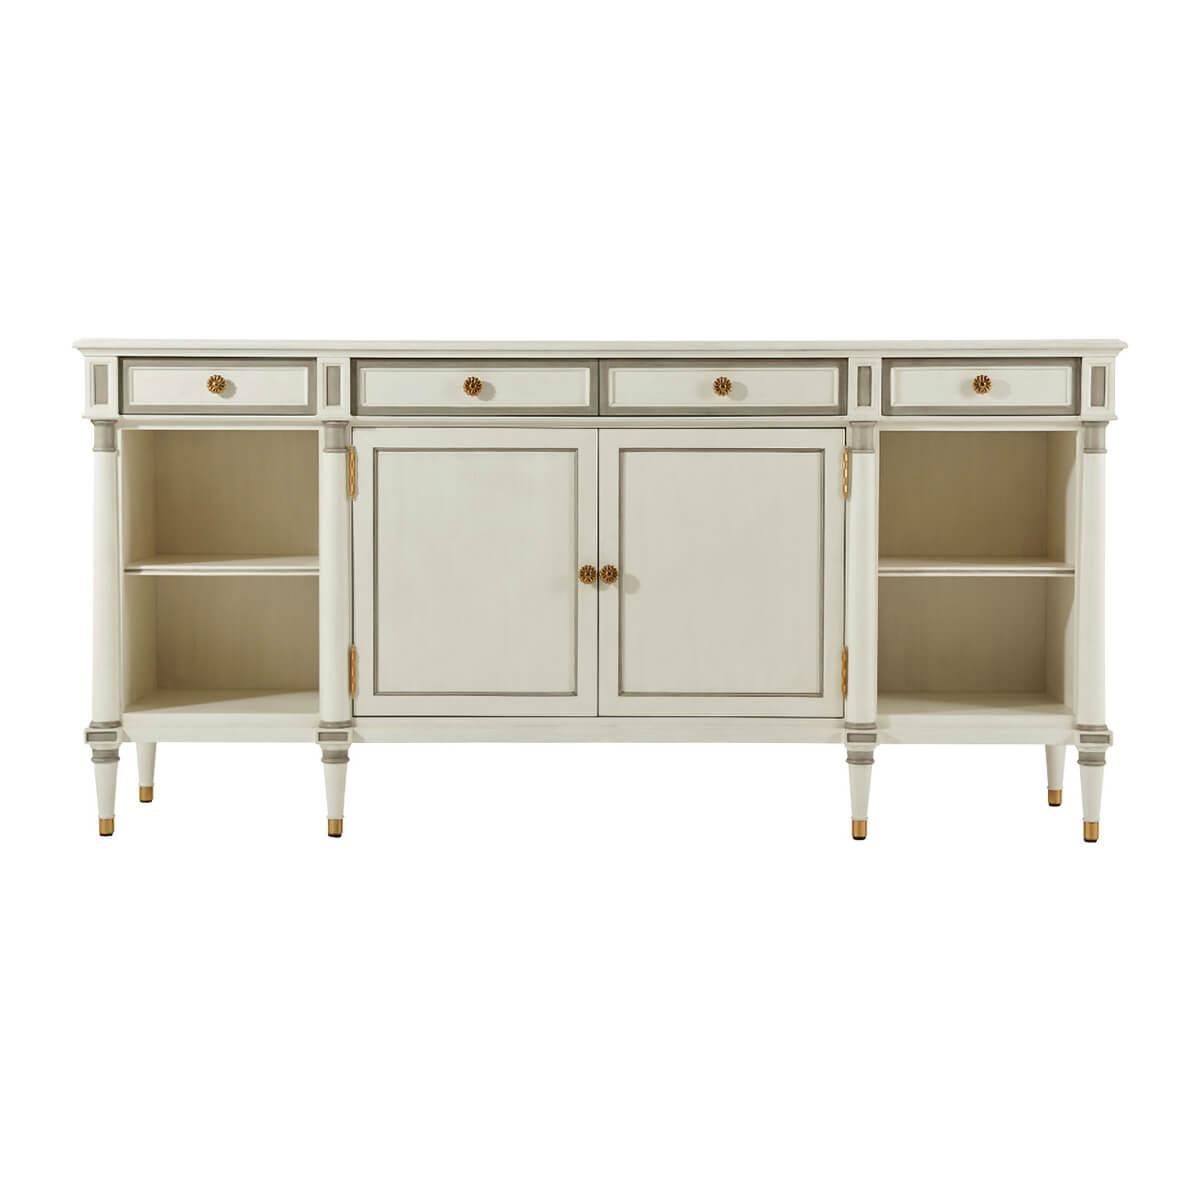 A modern spin on the traditional buffet cabinet. There’s storage aplenty with four frieze drawers, two center doors opening to interior shelves, plus open storage on buffet sides. Doric pilasters flow into turned, tapered legs capped in